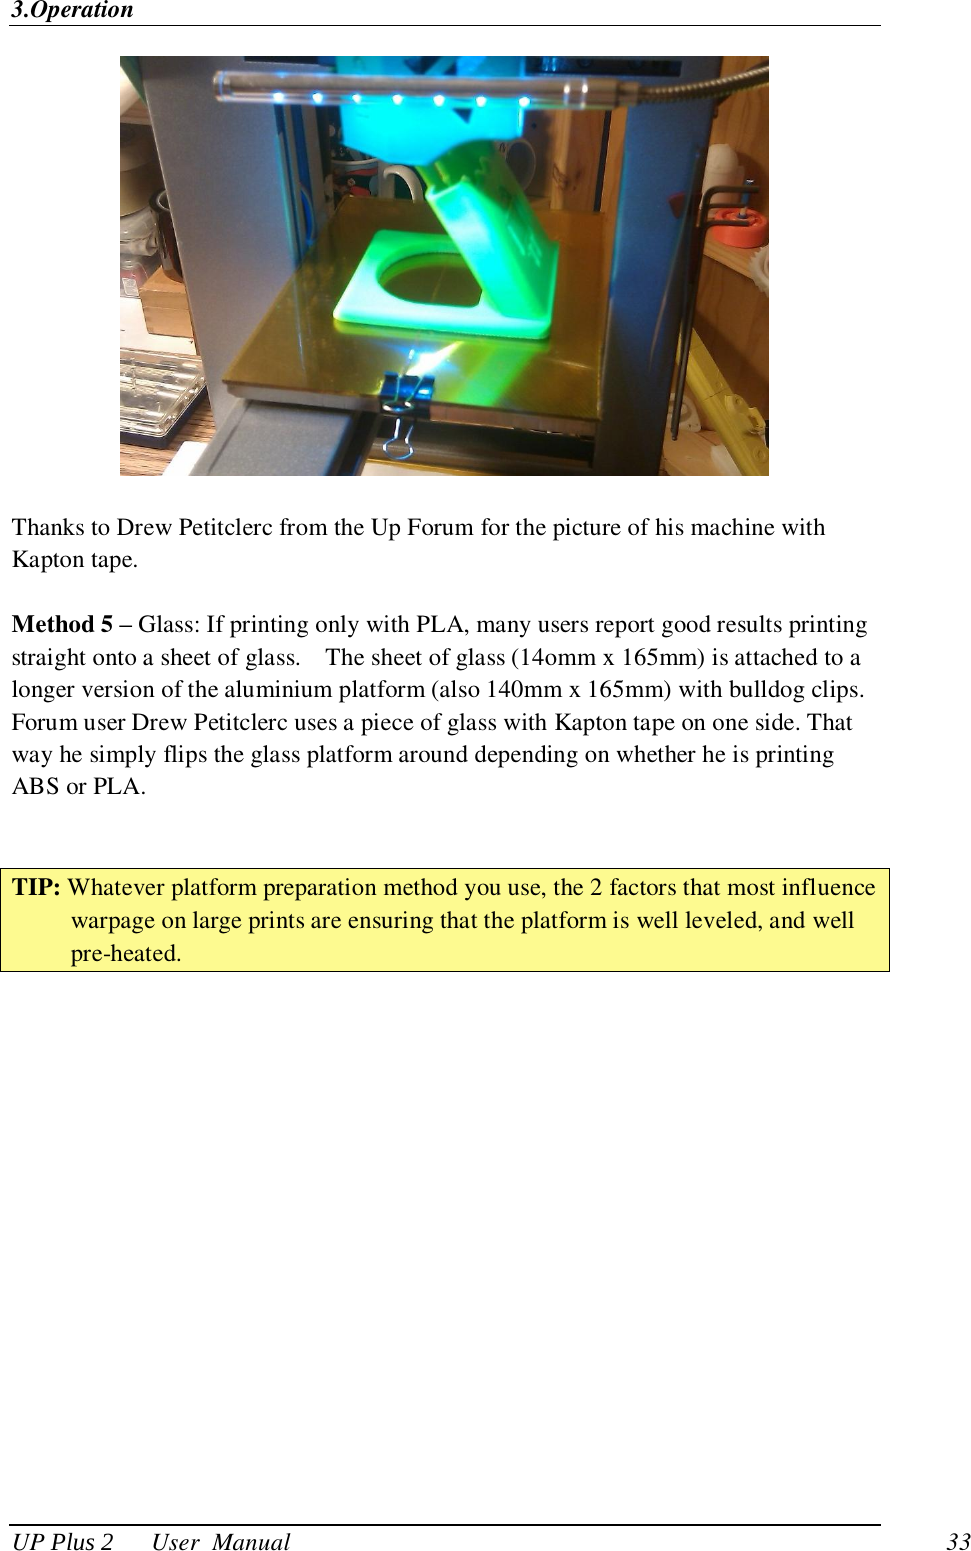 3.Operation UP Plus 2      User  Manual                                33   Thanks to Drew Petitclerc from the Up Forum for the picture of his machine with Kapton tape.  Method 5 – Glass: If printing only with PLA, many users report good results printing straight onto a sheet of glass.    The sheet of glass (14omm x 165mm) is attached to a longer version of the aluminium platform (also 140mm x 165mm) with bulldog clips. Forum user Drew Petitclerc uses a piece of glass with Kapton tape on one side. That way he simply flips the glass platform around depending on whether he is printing ABS or PLA.   TIP: Whatever platform preparation method you use, the 2 factors that most influence warpage on large prints are ensuring that the platform is well leveled, and well pre-heated. 